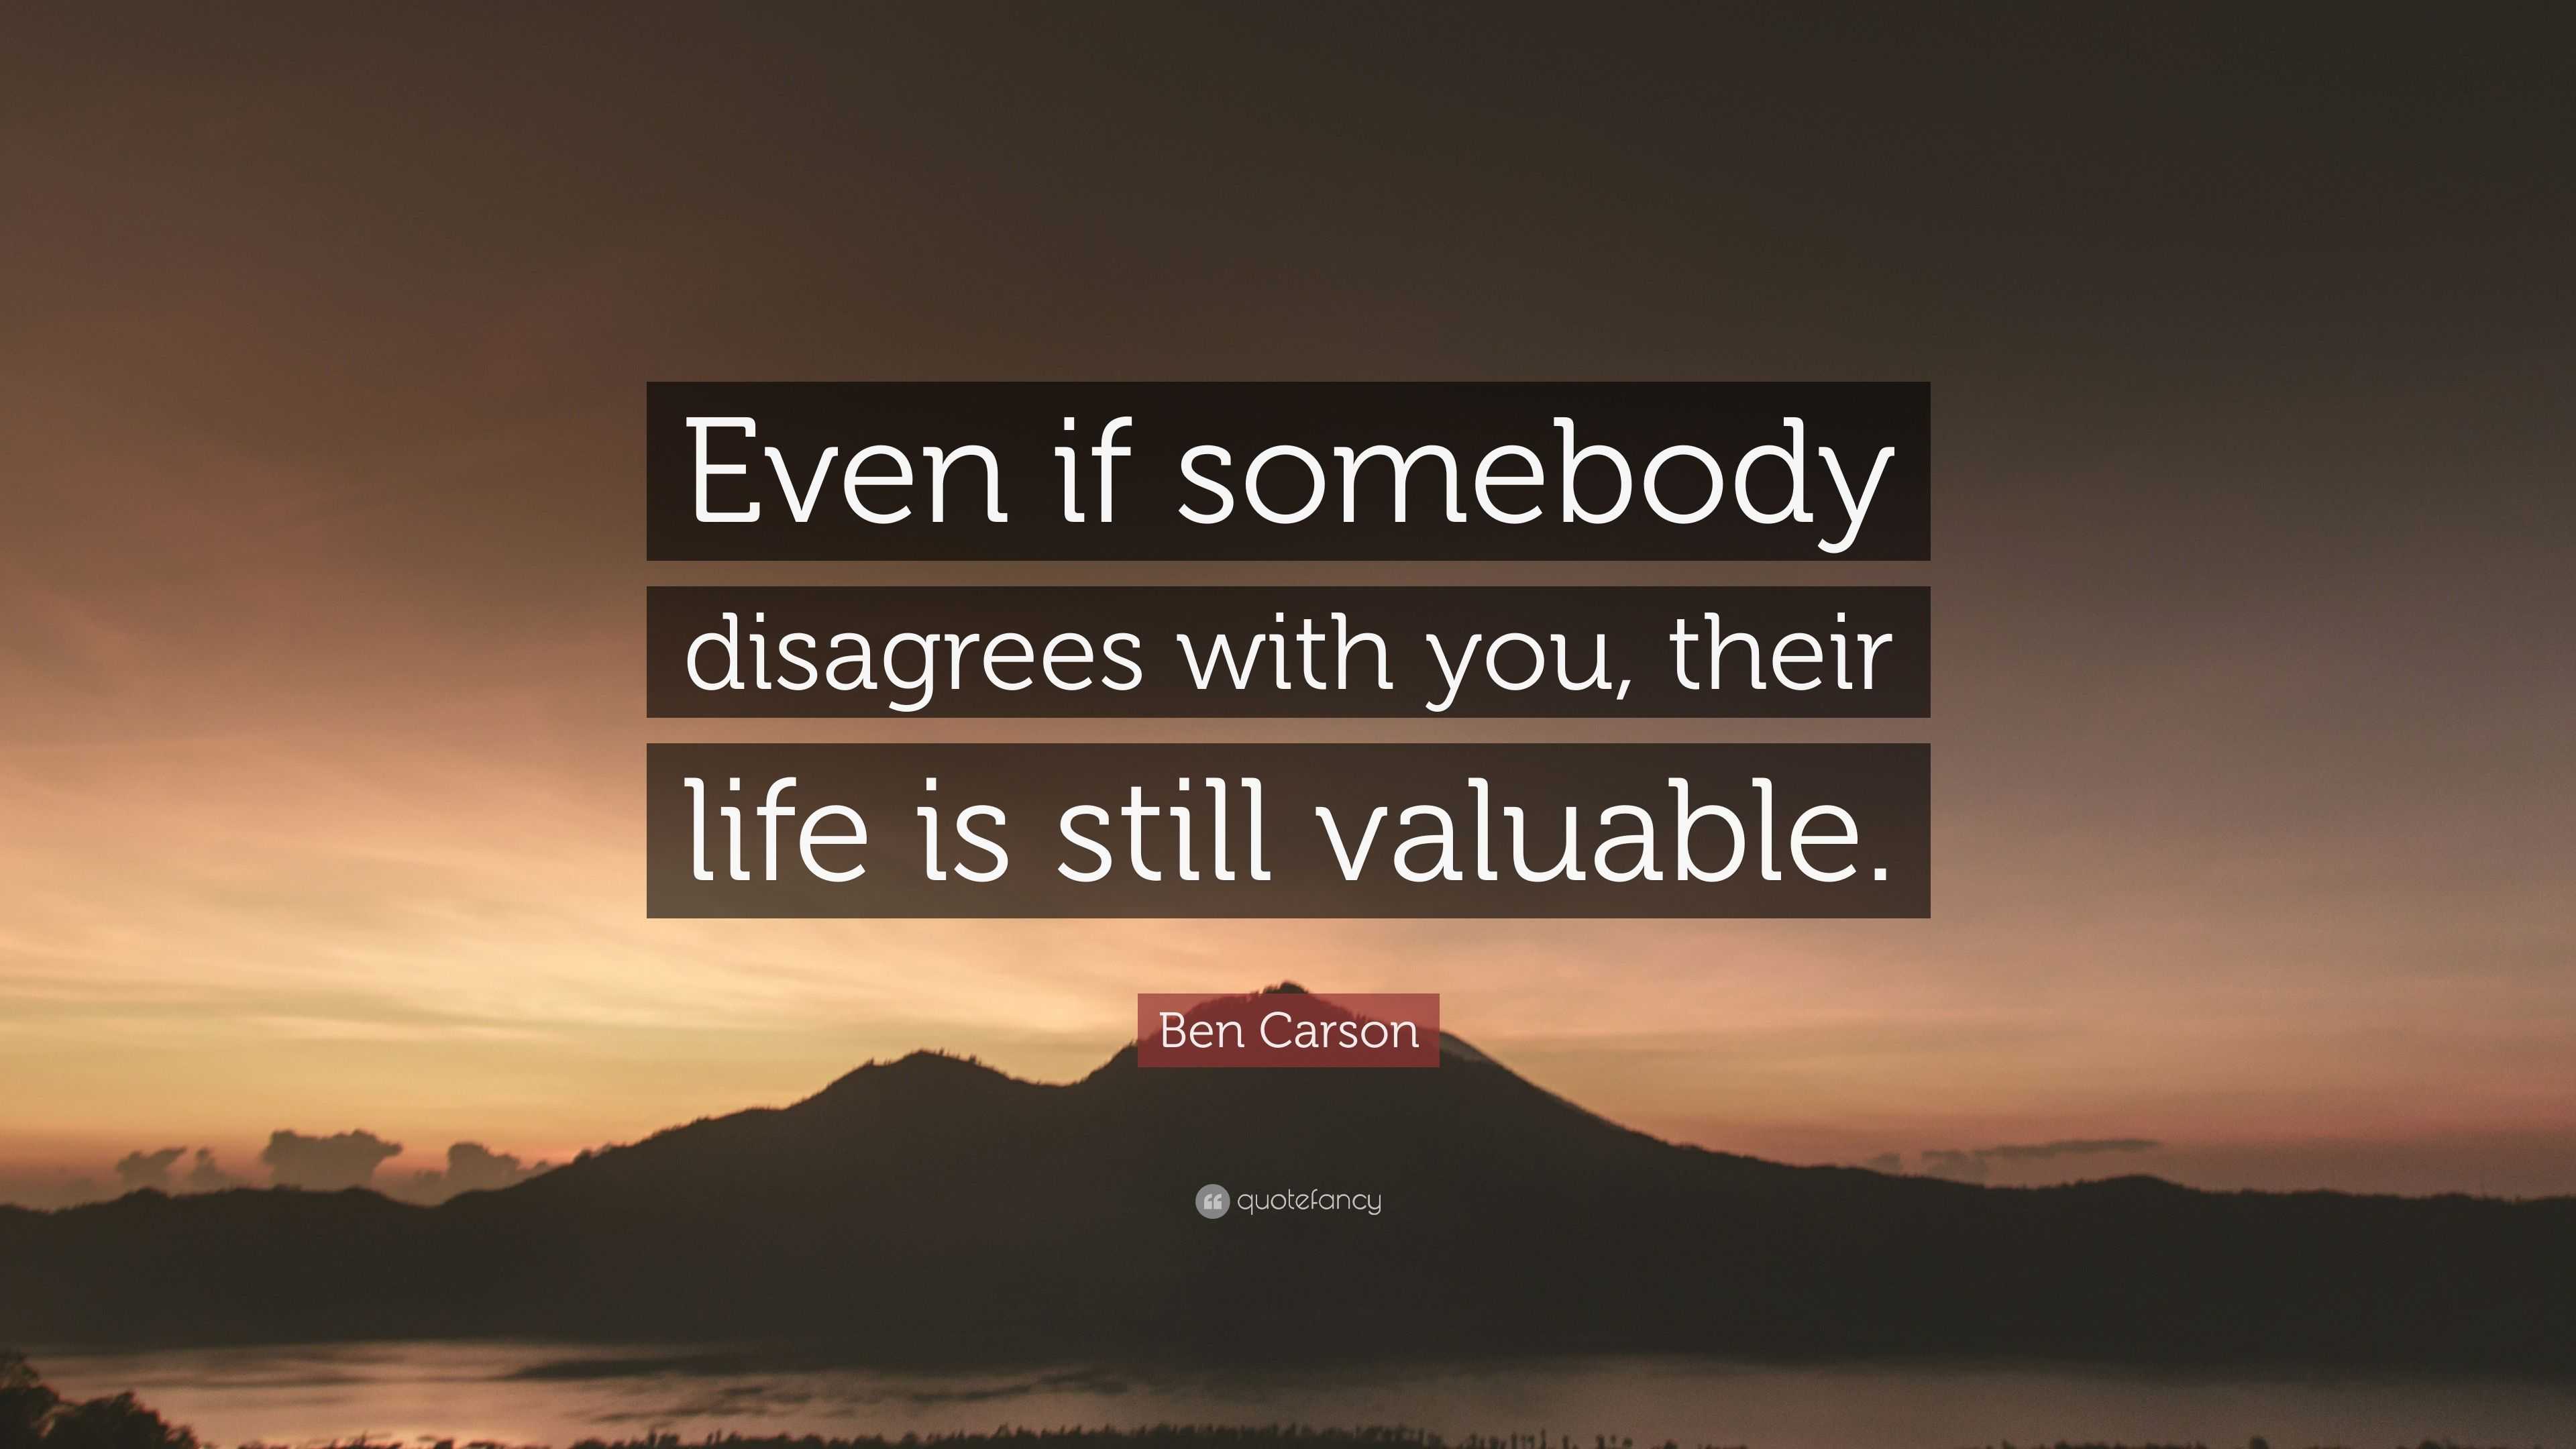 Ben Carson Quote: “Even if somebody disagrees with you, their life is ...